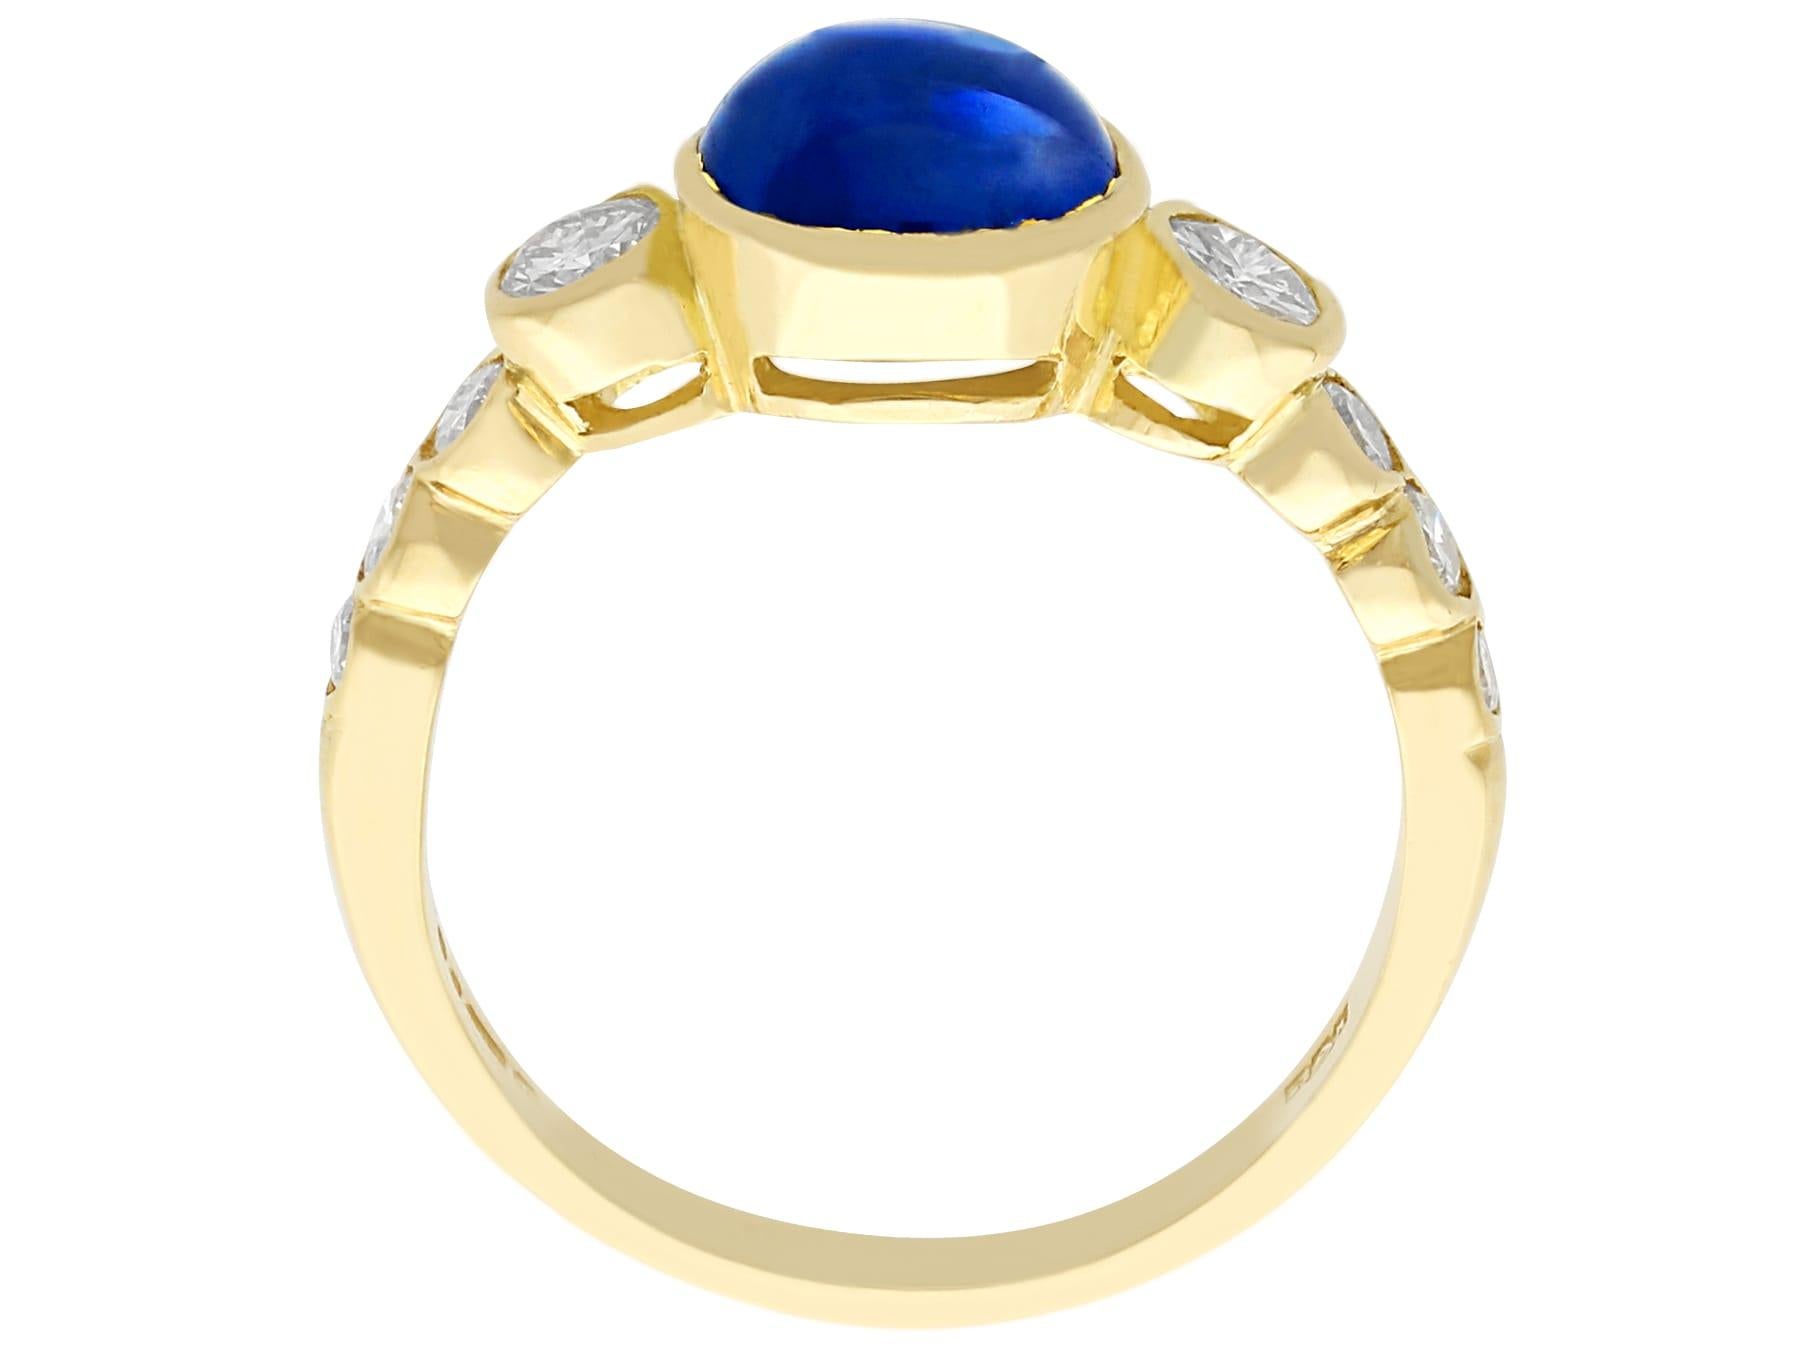 Vintage 1980s 1.74ct Cabochon Cut Sapphire and Diamond Yellow Gold Cocktail Ring For Sale 1